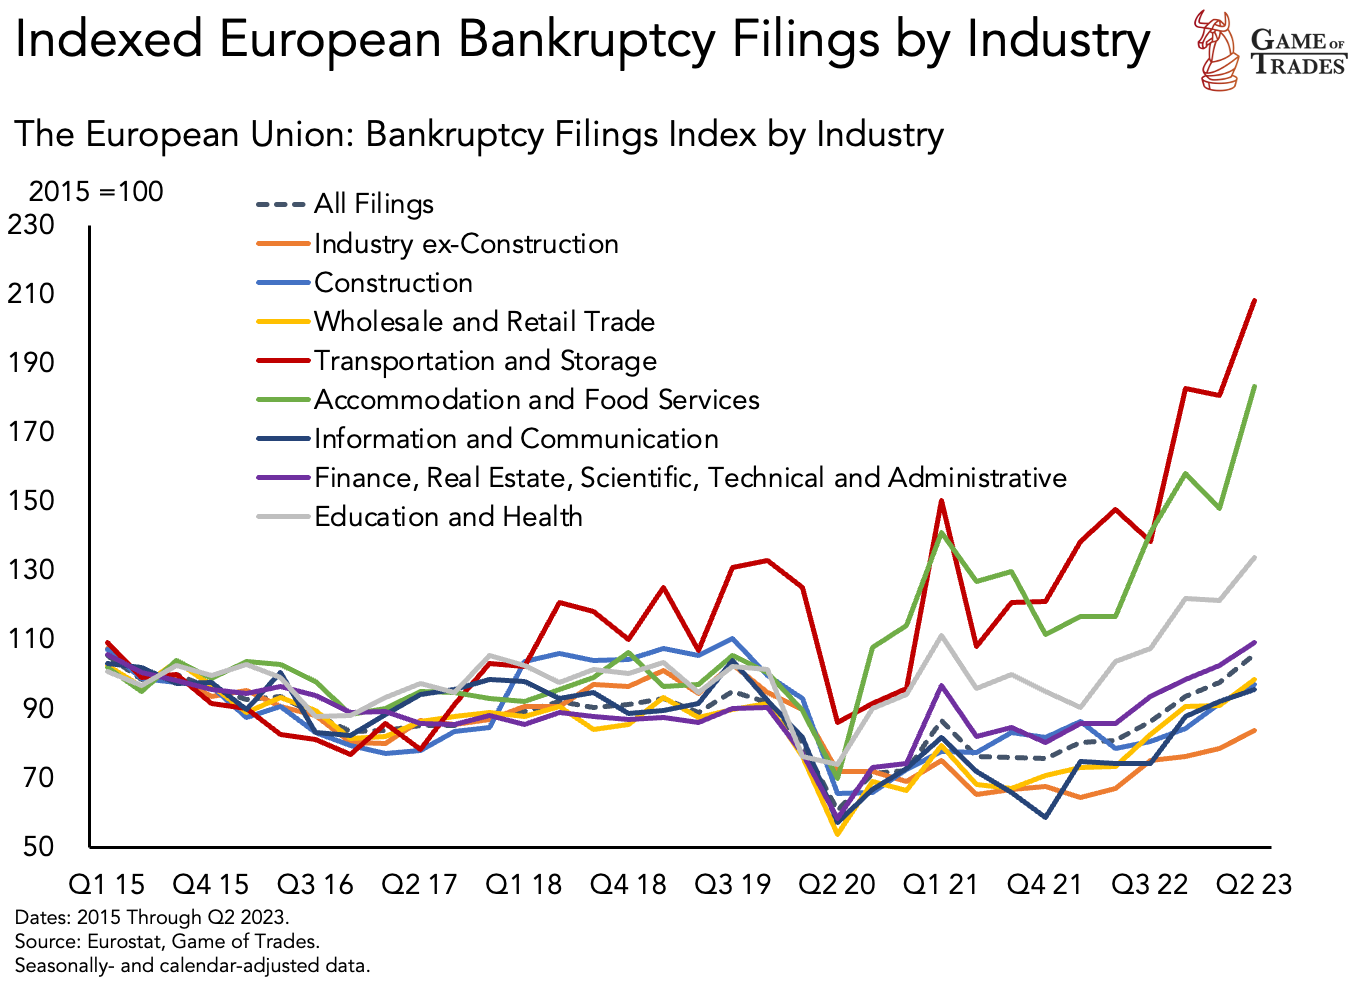 EU Bankruptcy Filings by Industry